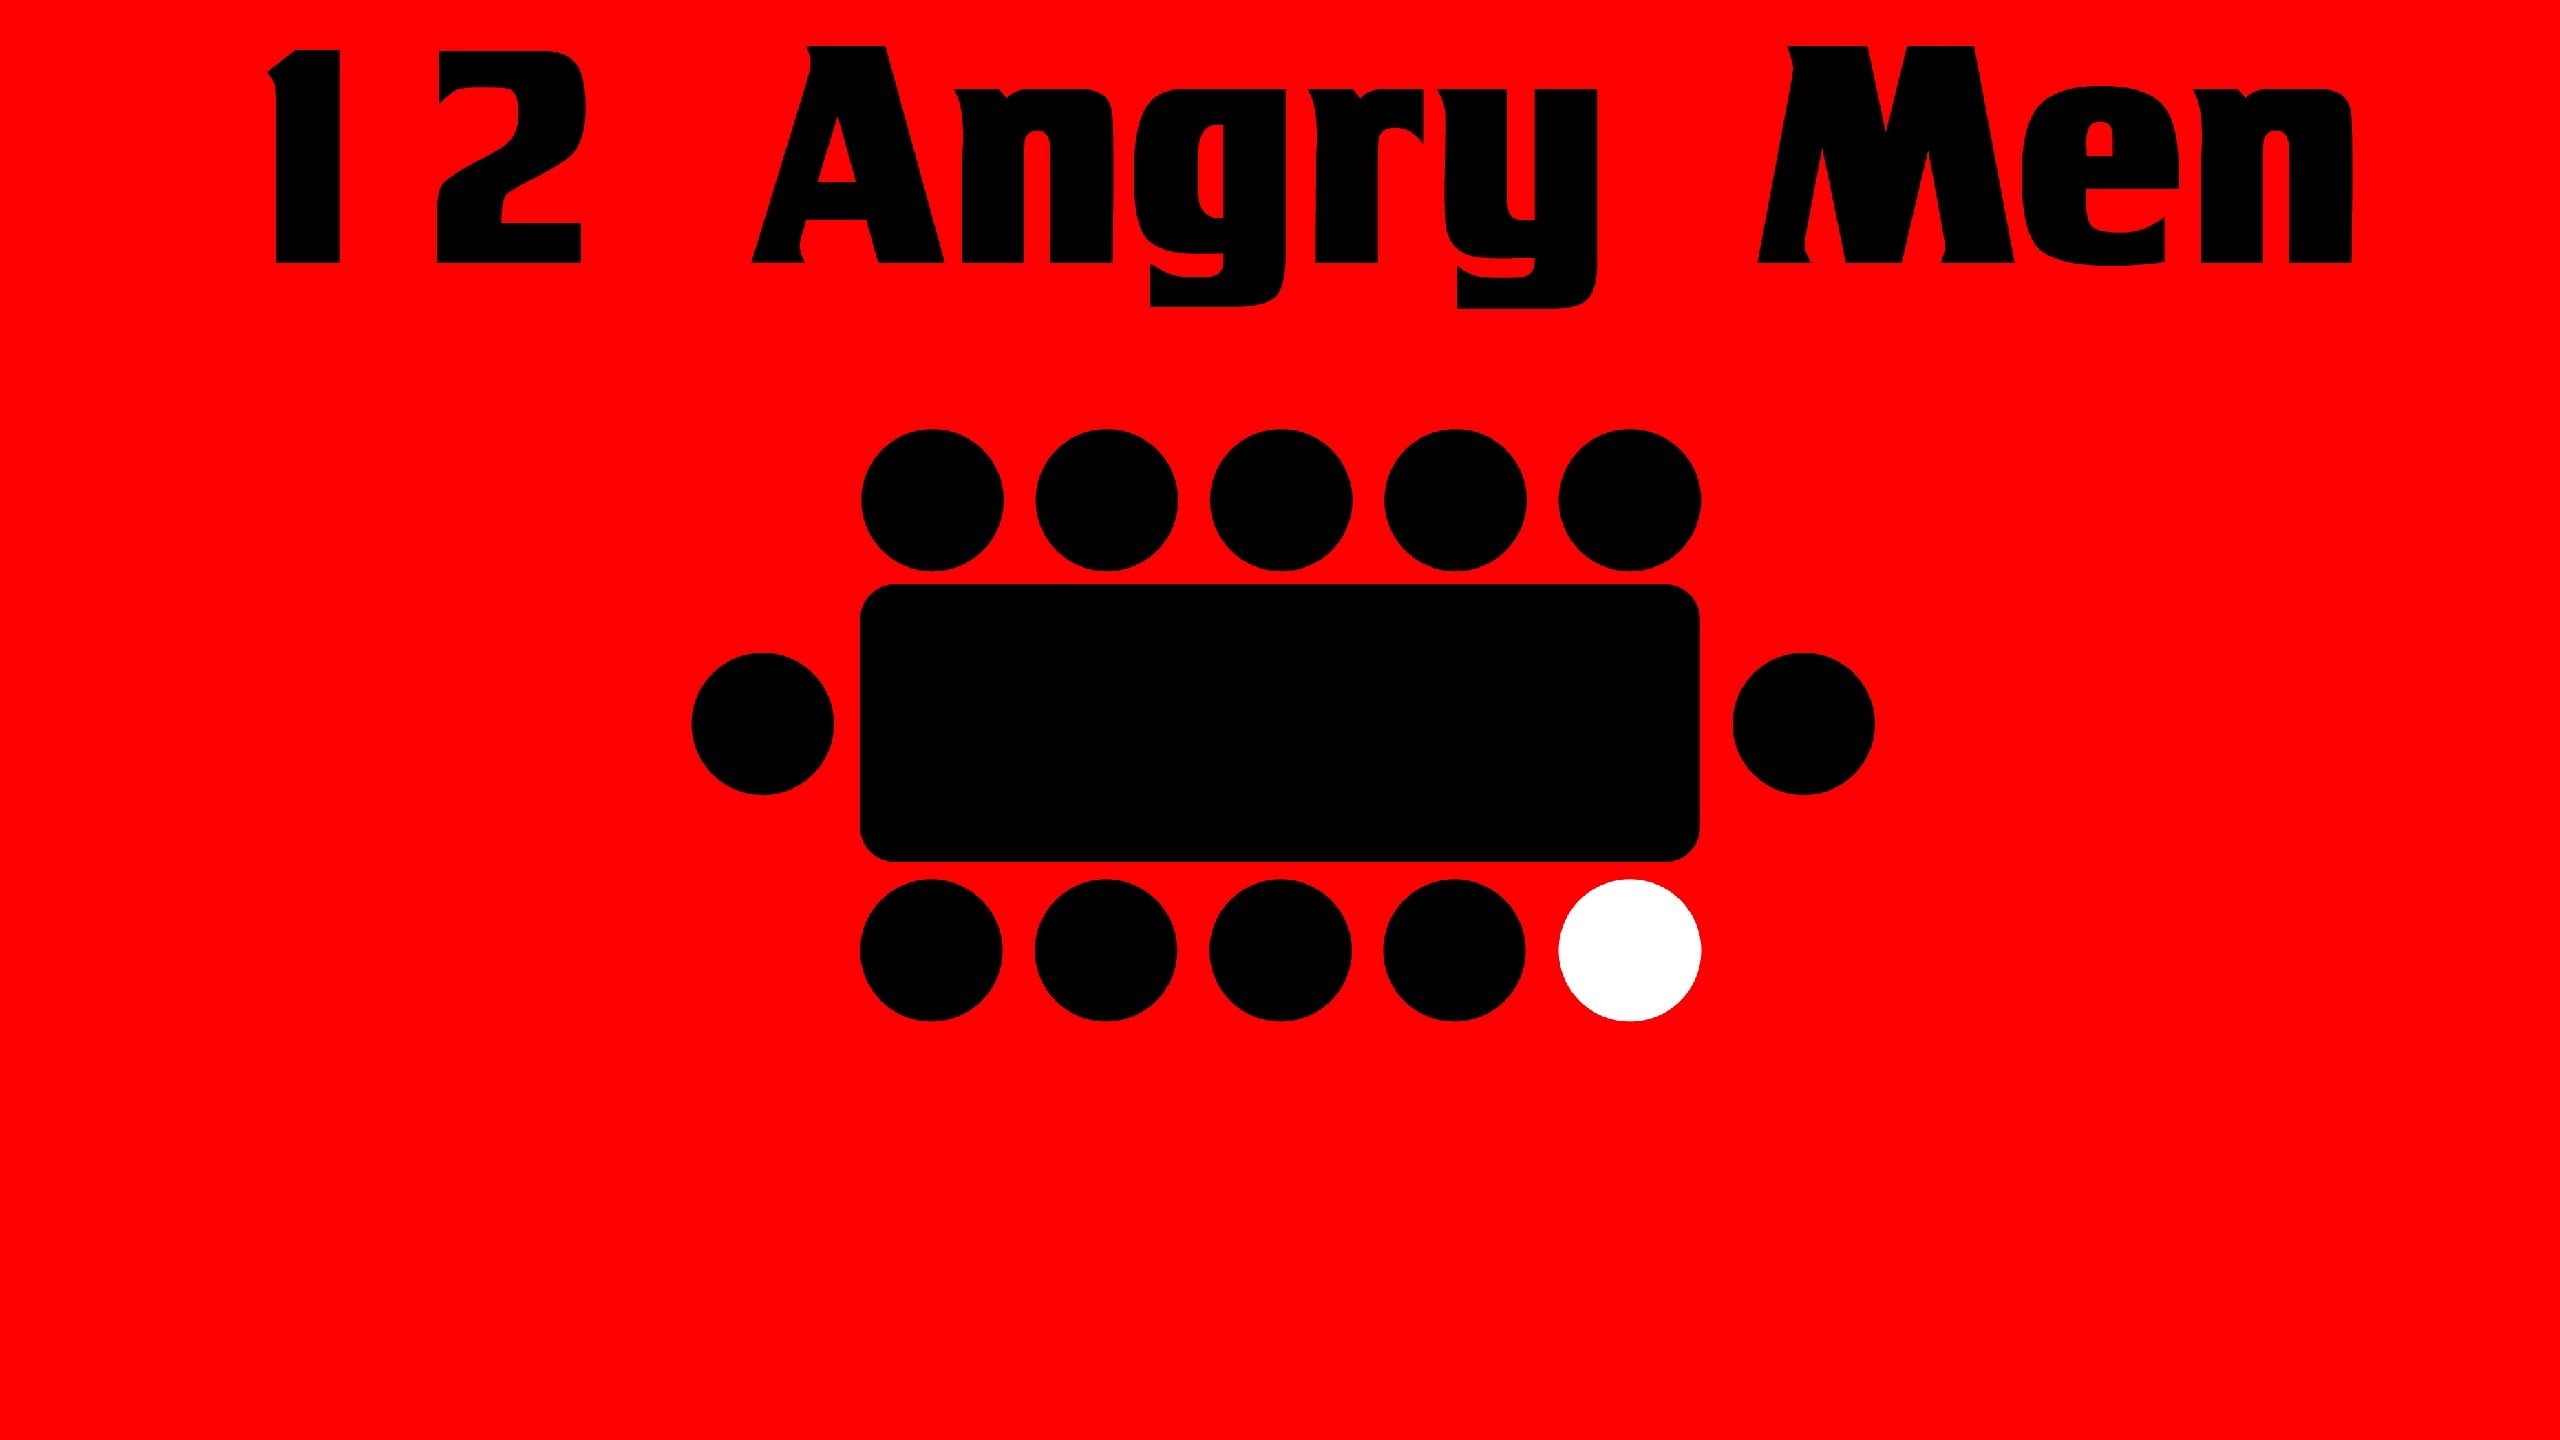 12 angry men, text, red, sign, communication, western script